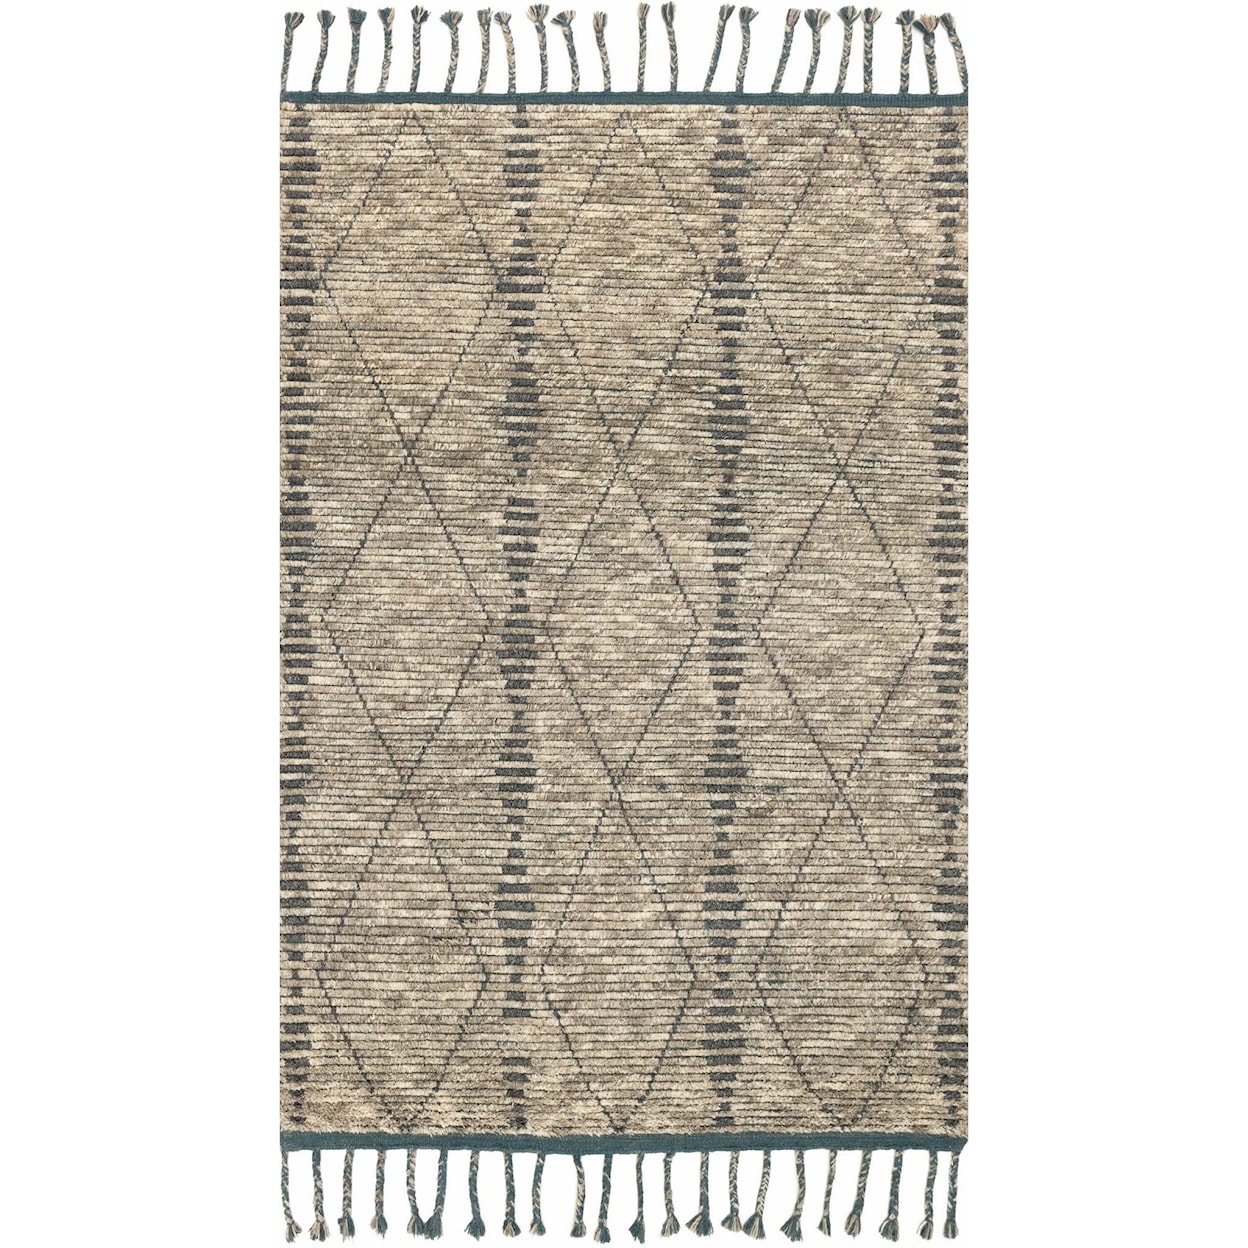 Magnolia Home by Joanna Gaines for Loloi Tulum 7' 9" x 9' 9" Rectangle Rug